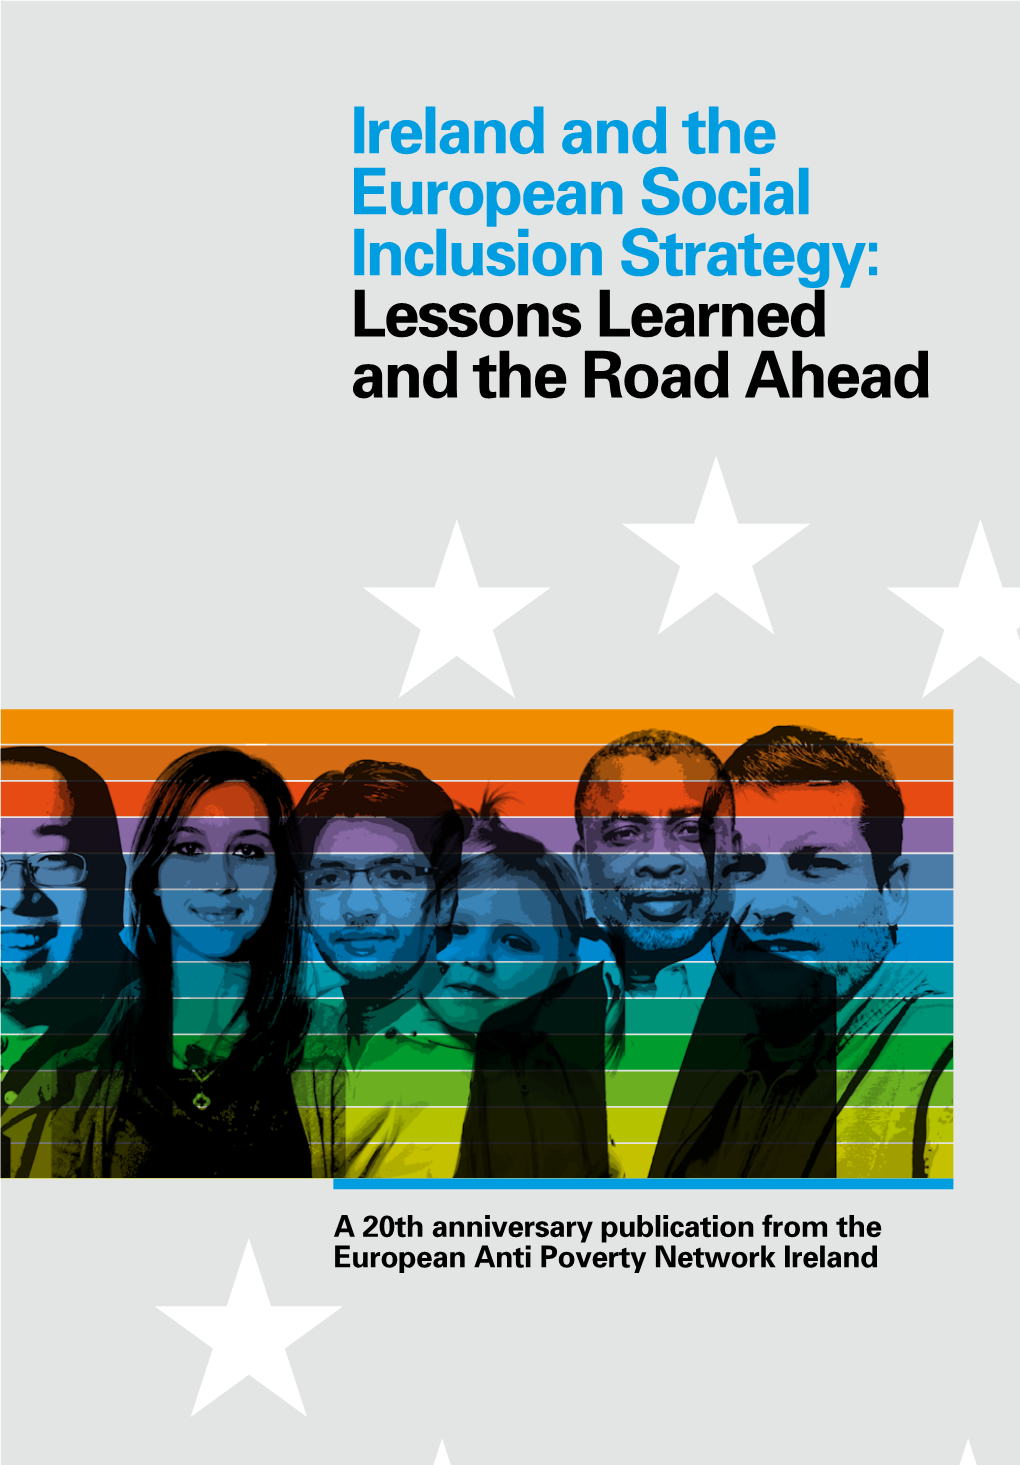 Ireland and the European Social Inclusion Strategy: Lessons Learned and the Road Ahead